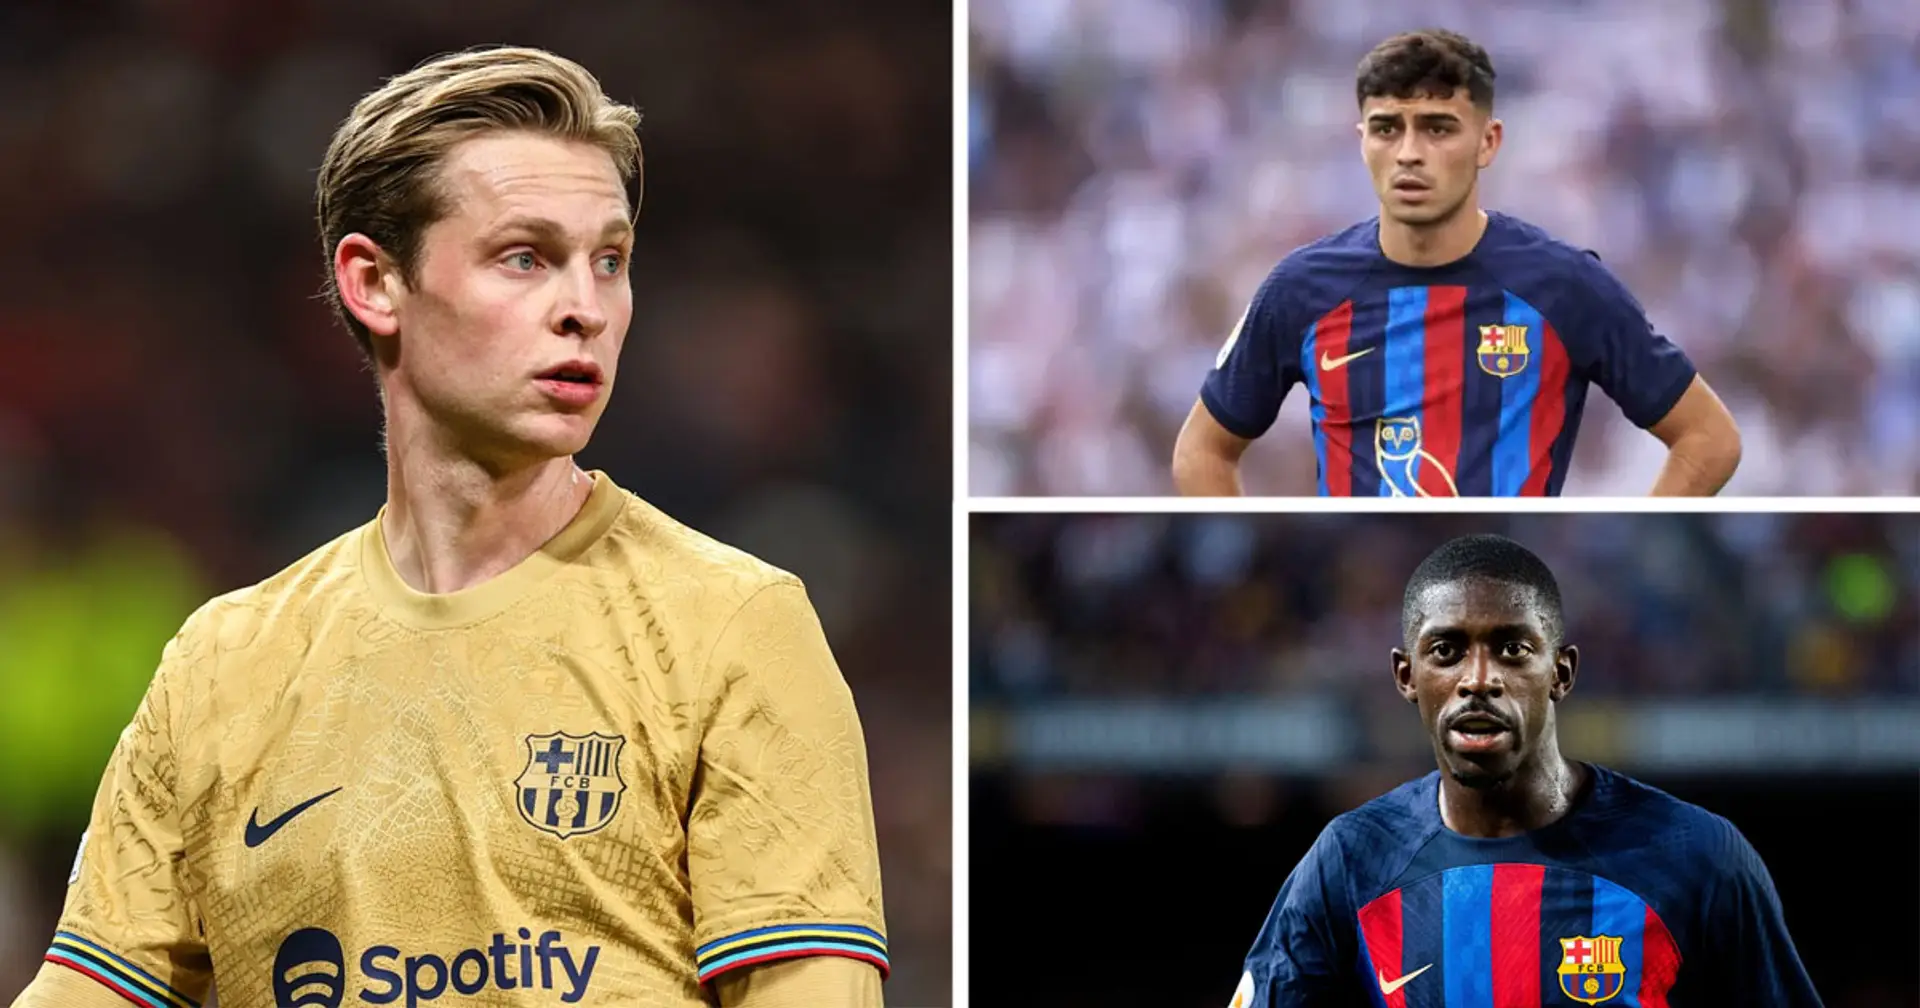 De Jong not training with the group ahead of El Clasico, Barca to miss 4 key players